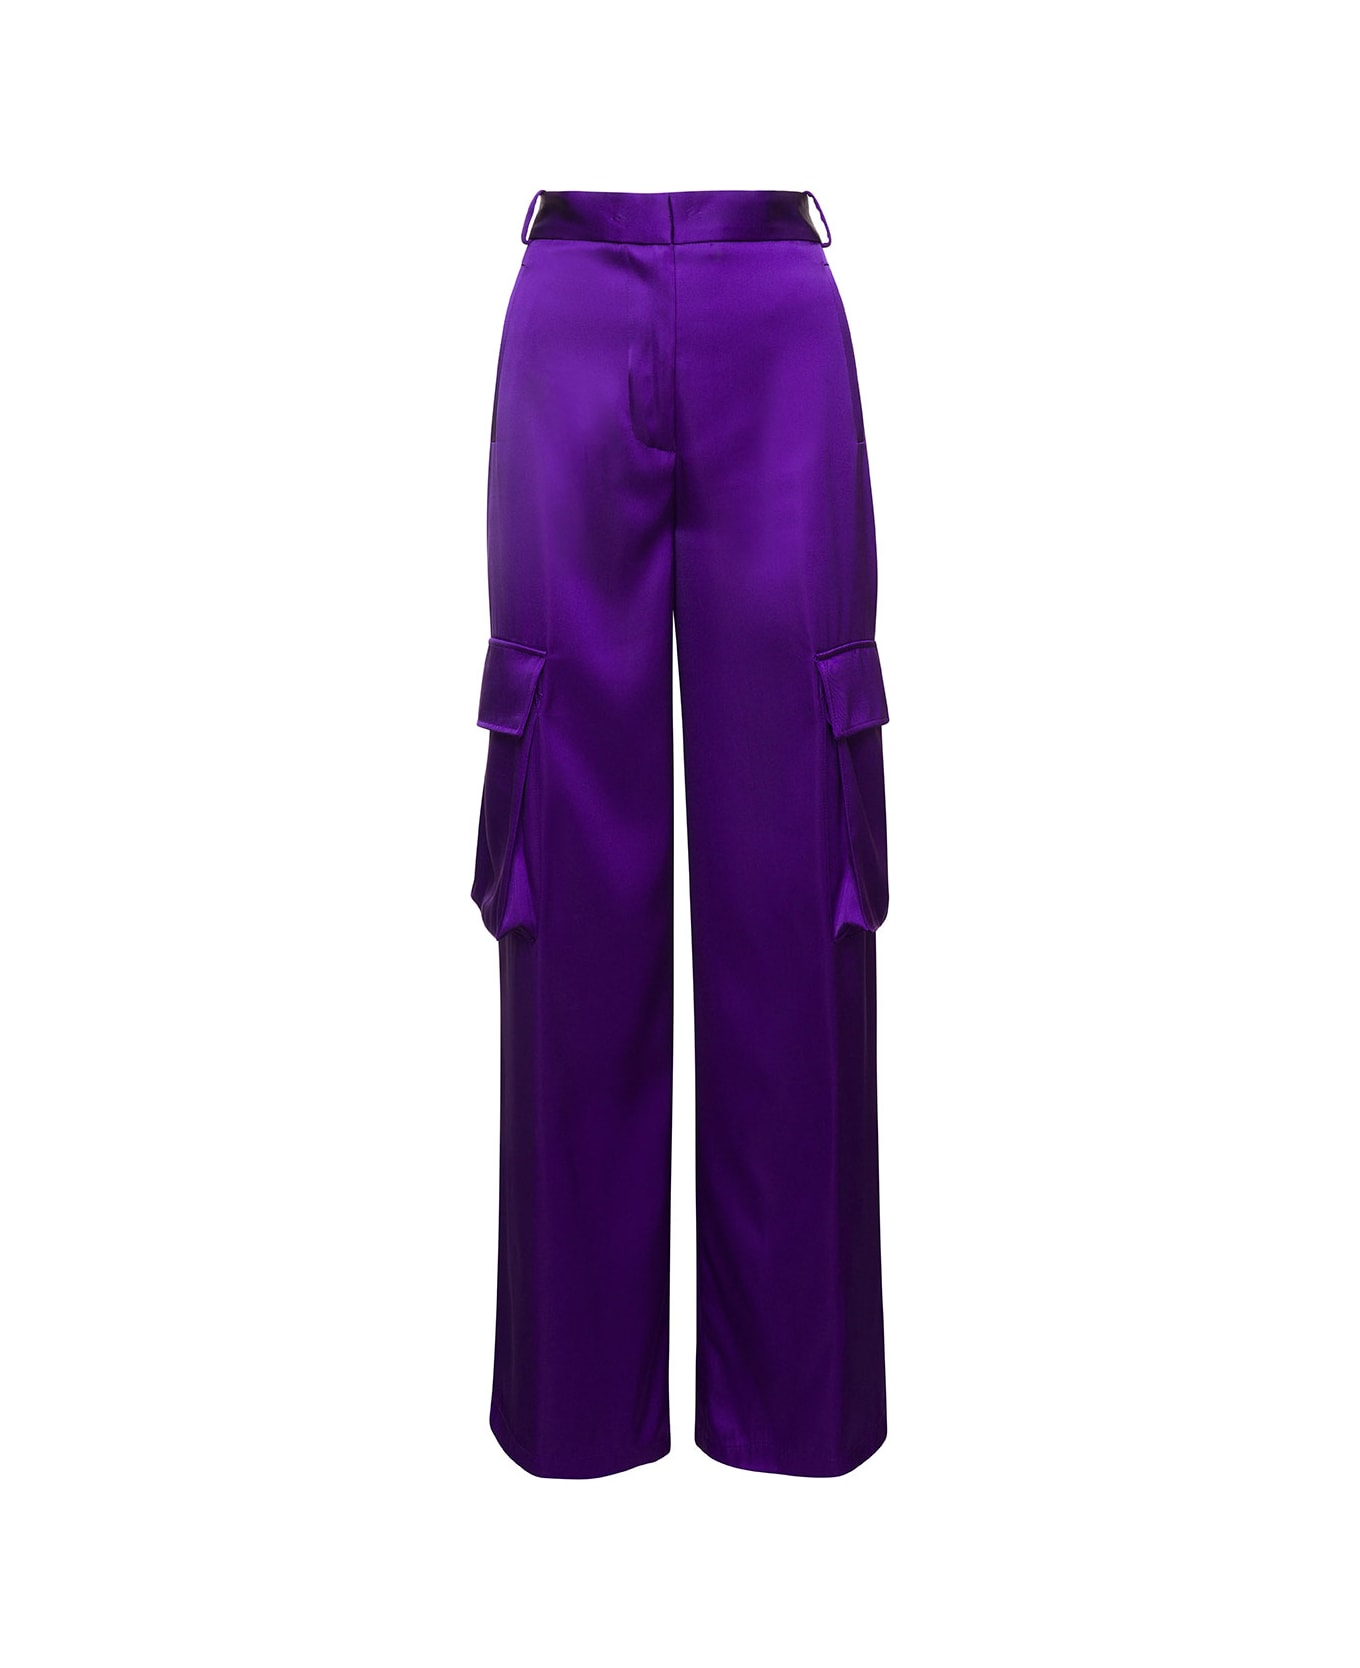 Versace Purple Cargo Pants Satn Effect With Cargo Pockets In Viscose Woman - Violet